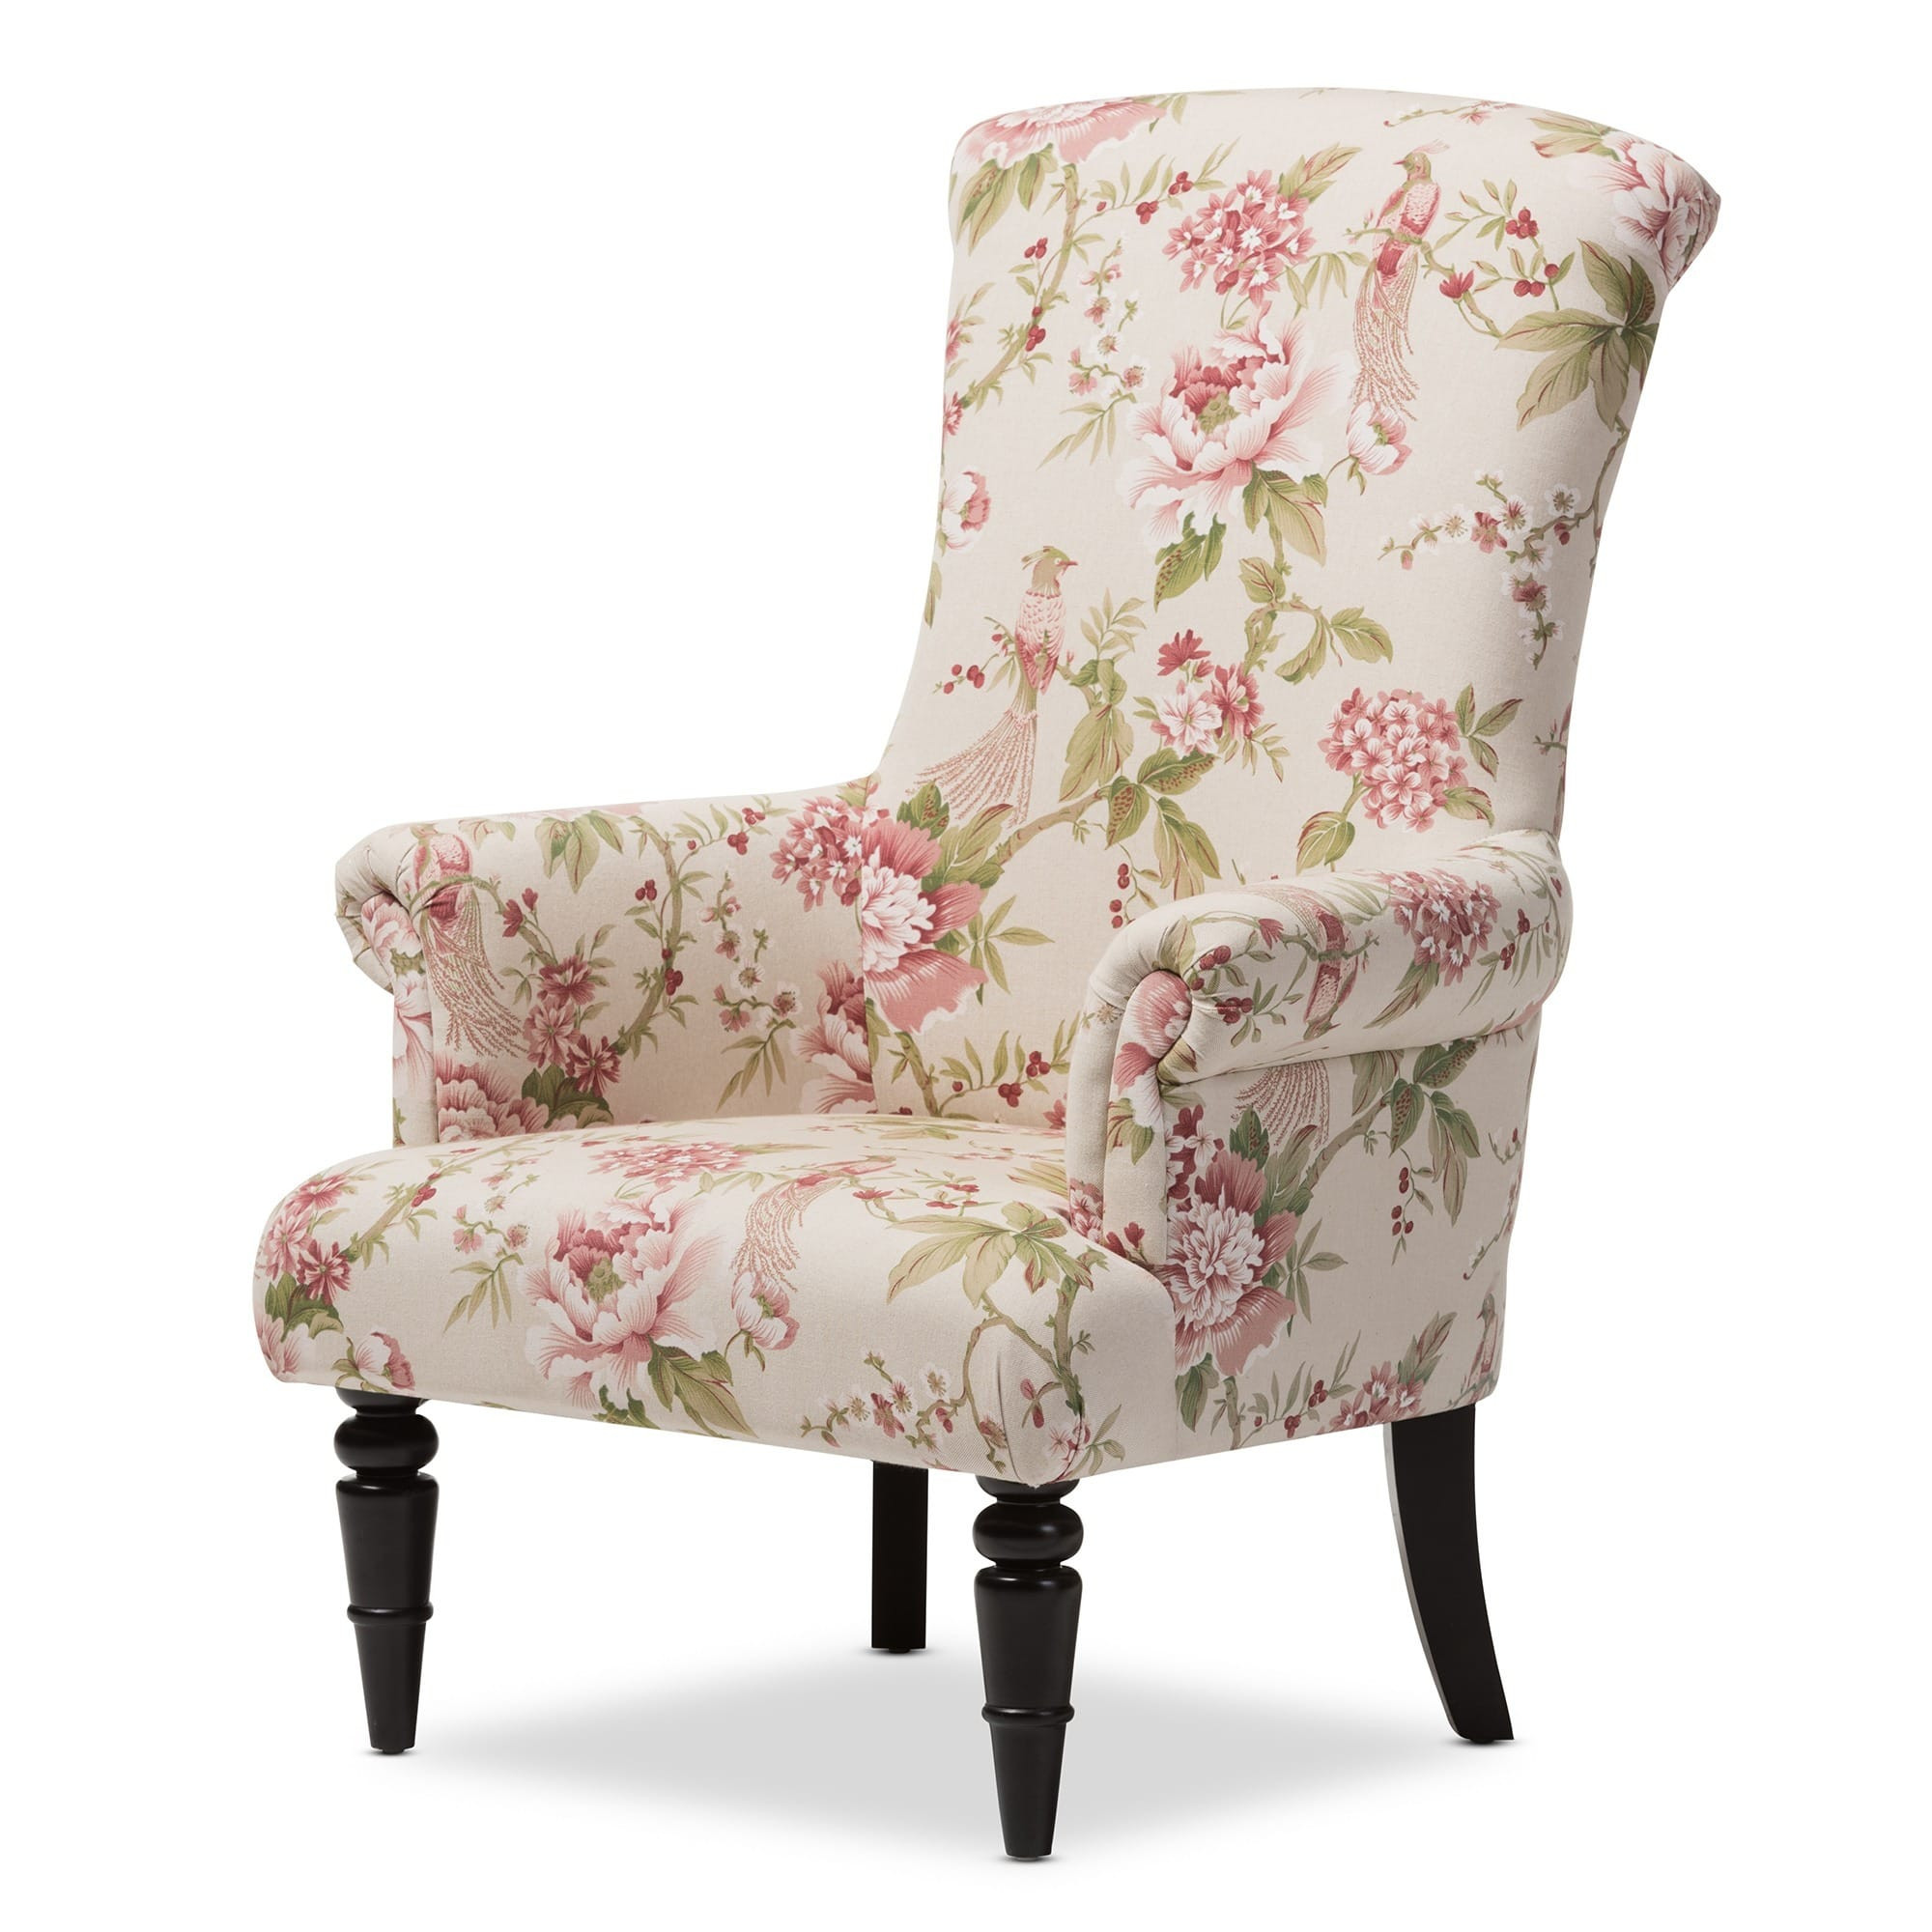 Floral Living Room Chairs
 Buy Living Room Chairs line at Overstock